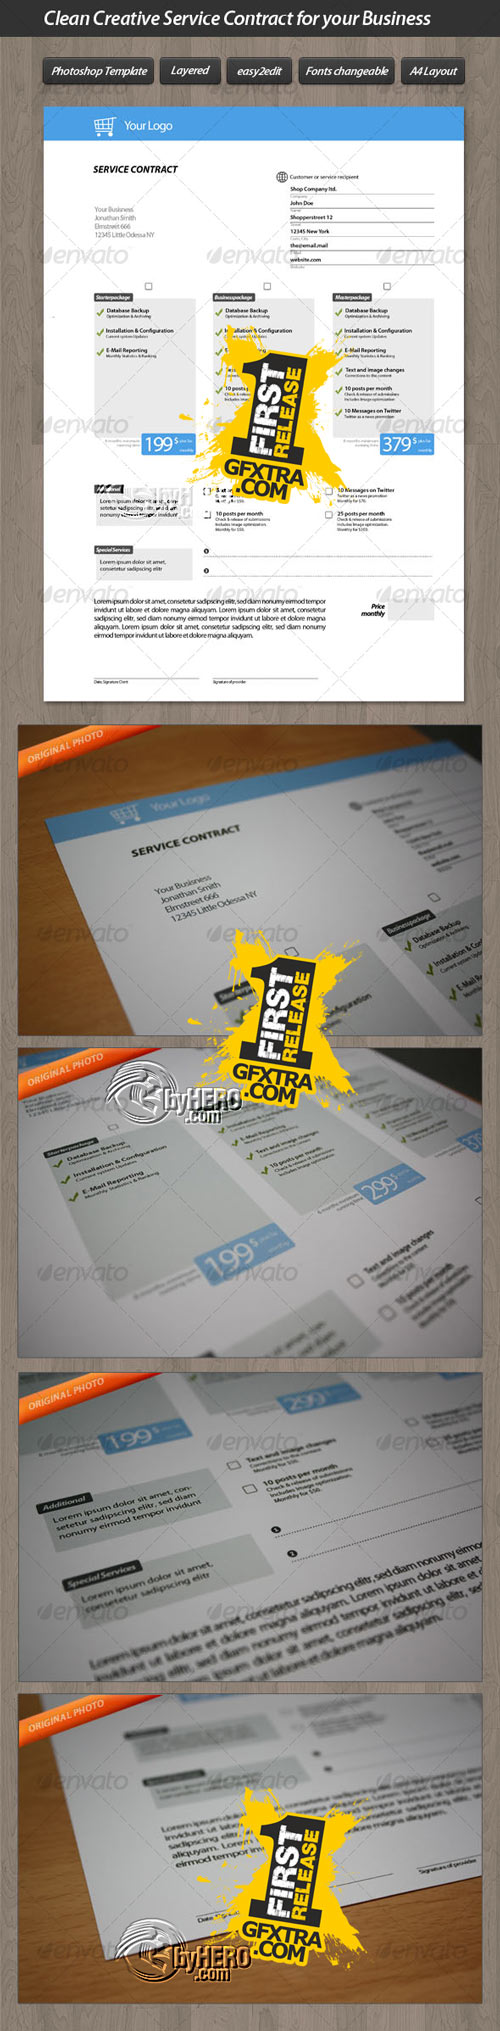 Clean Creative Service Contract for your Business - GraphicRiver